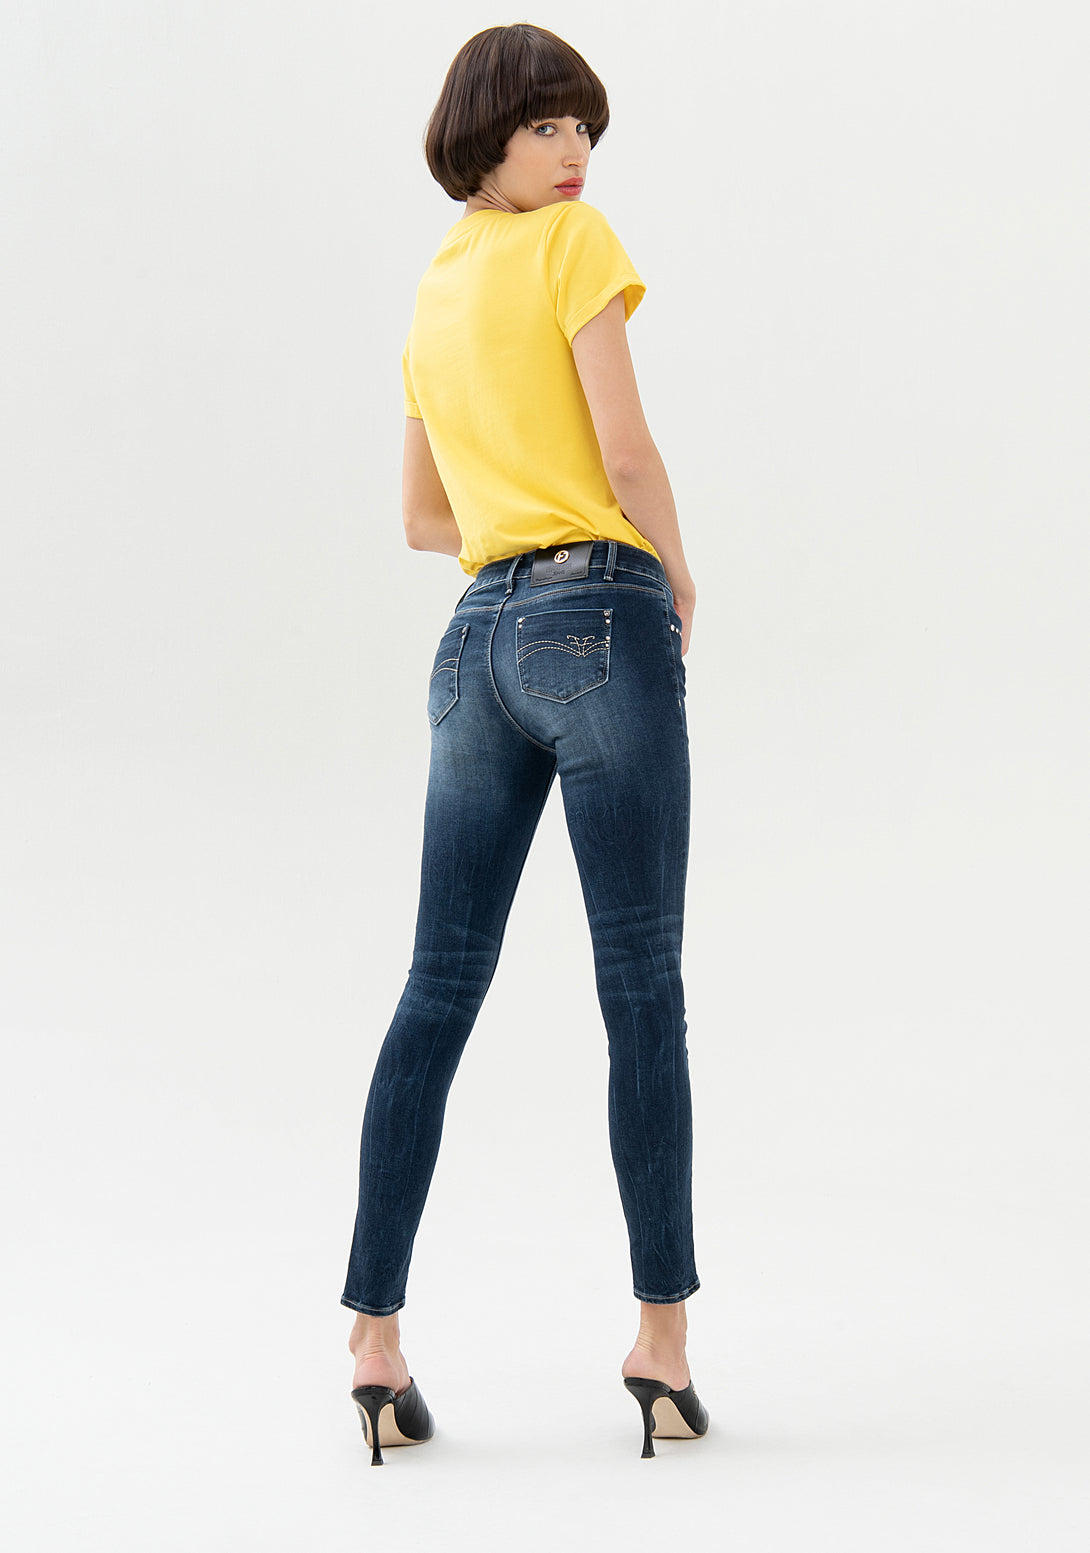 Jeans skinny fit made in stretch denim with middle wash